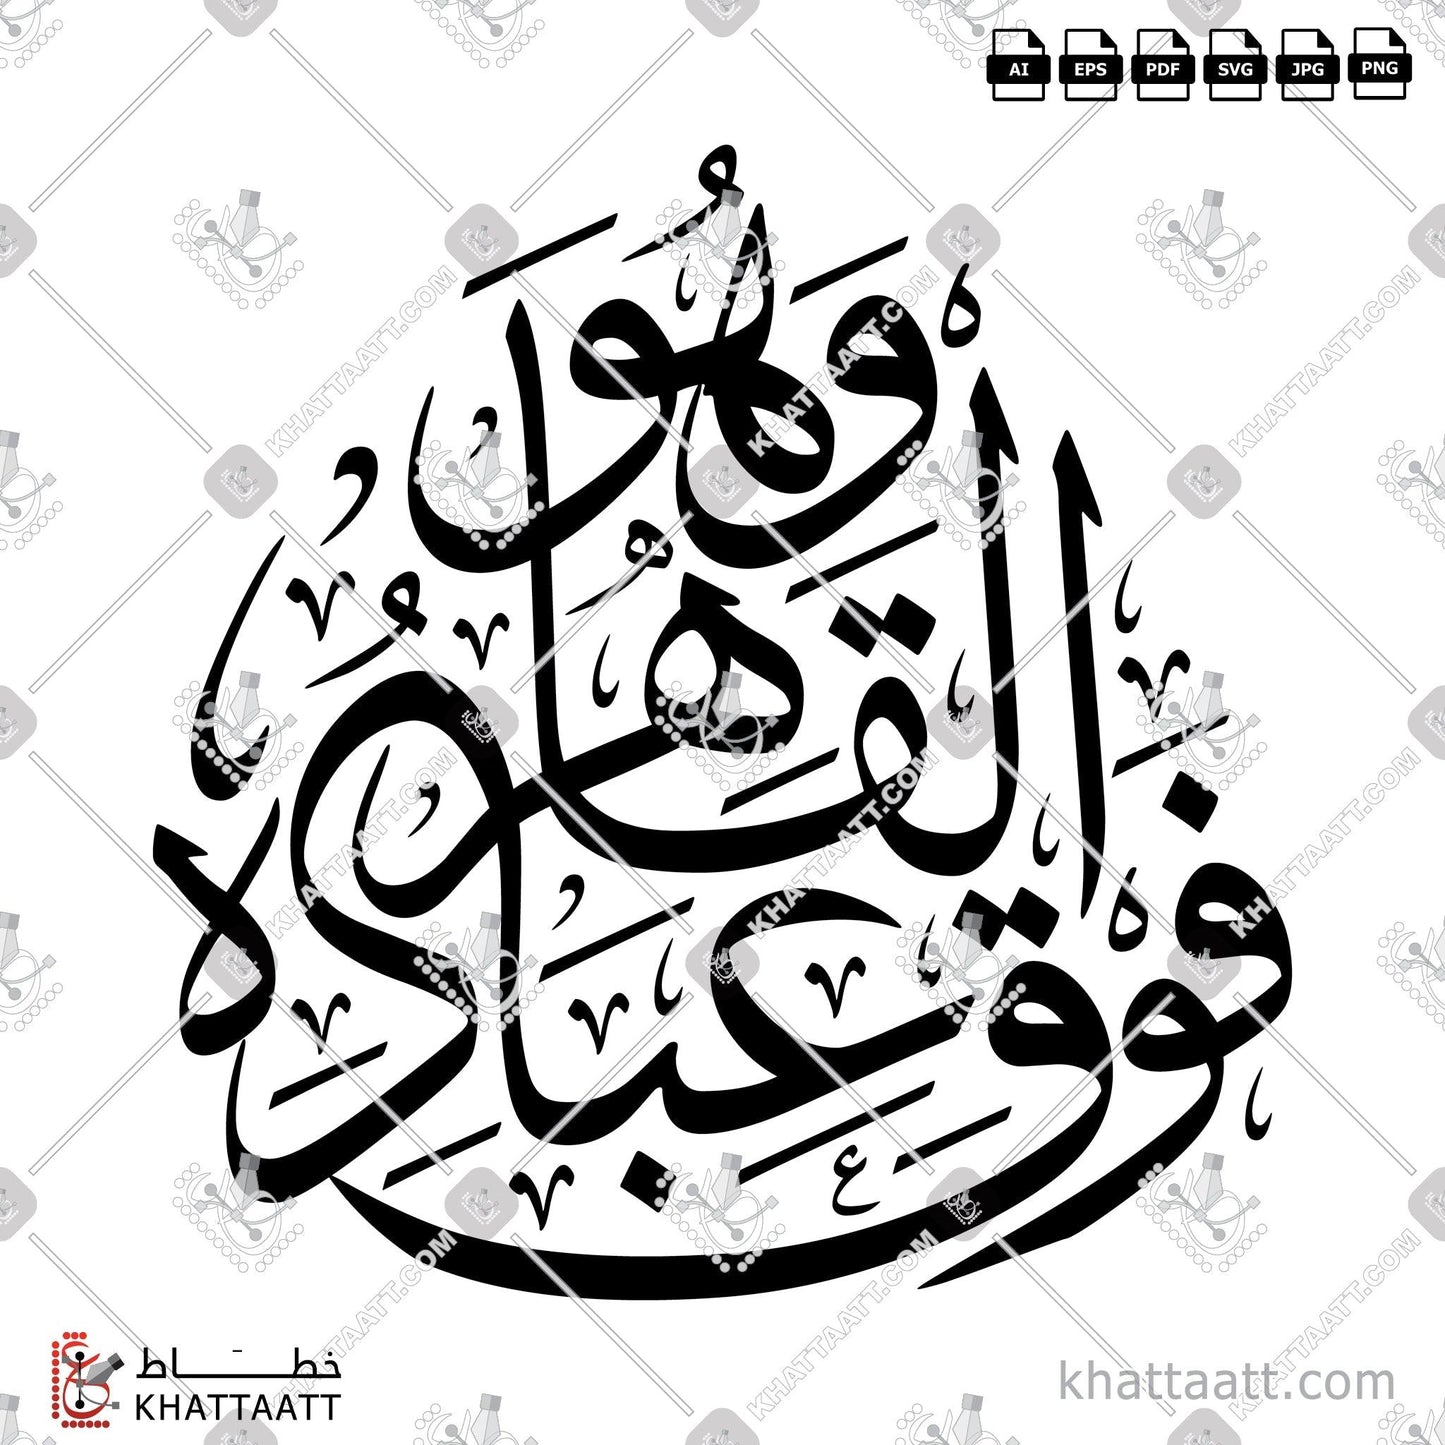 Download Arabic Calligraphy of وهو القاهر فوق عباده in Thuluth - خط الثلث in vector and .png